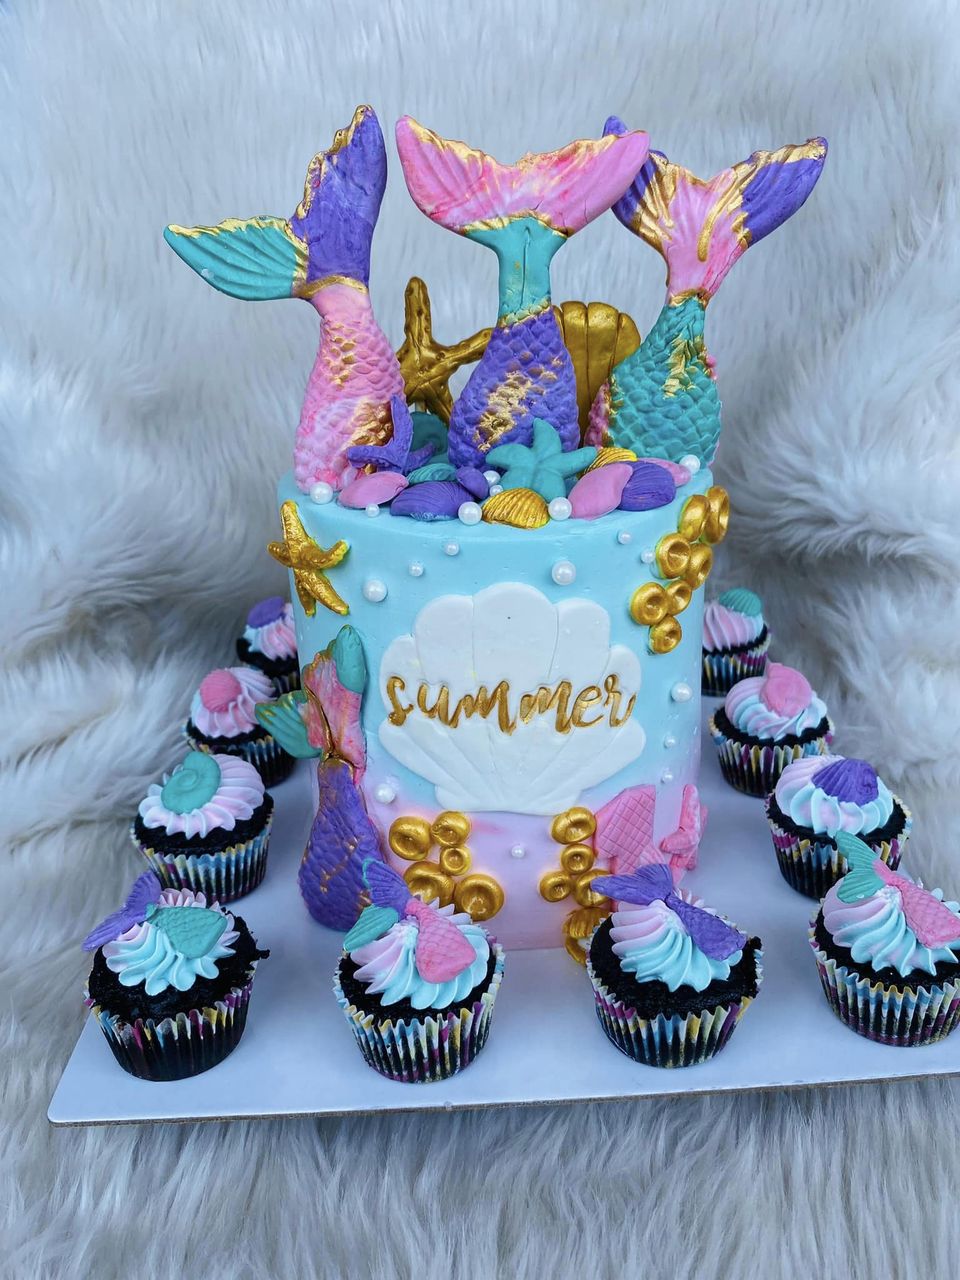 🧜🏻‍♀️🐚🎂 Dive into a collection of beautiful and whimsical cake designs that promise to make your mermaid-themed party unforgettable